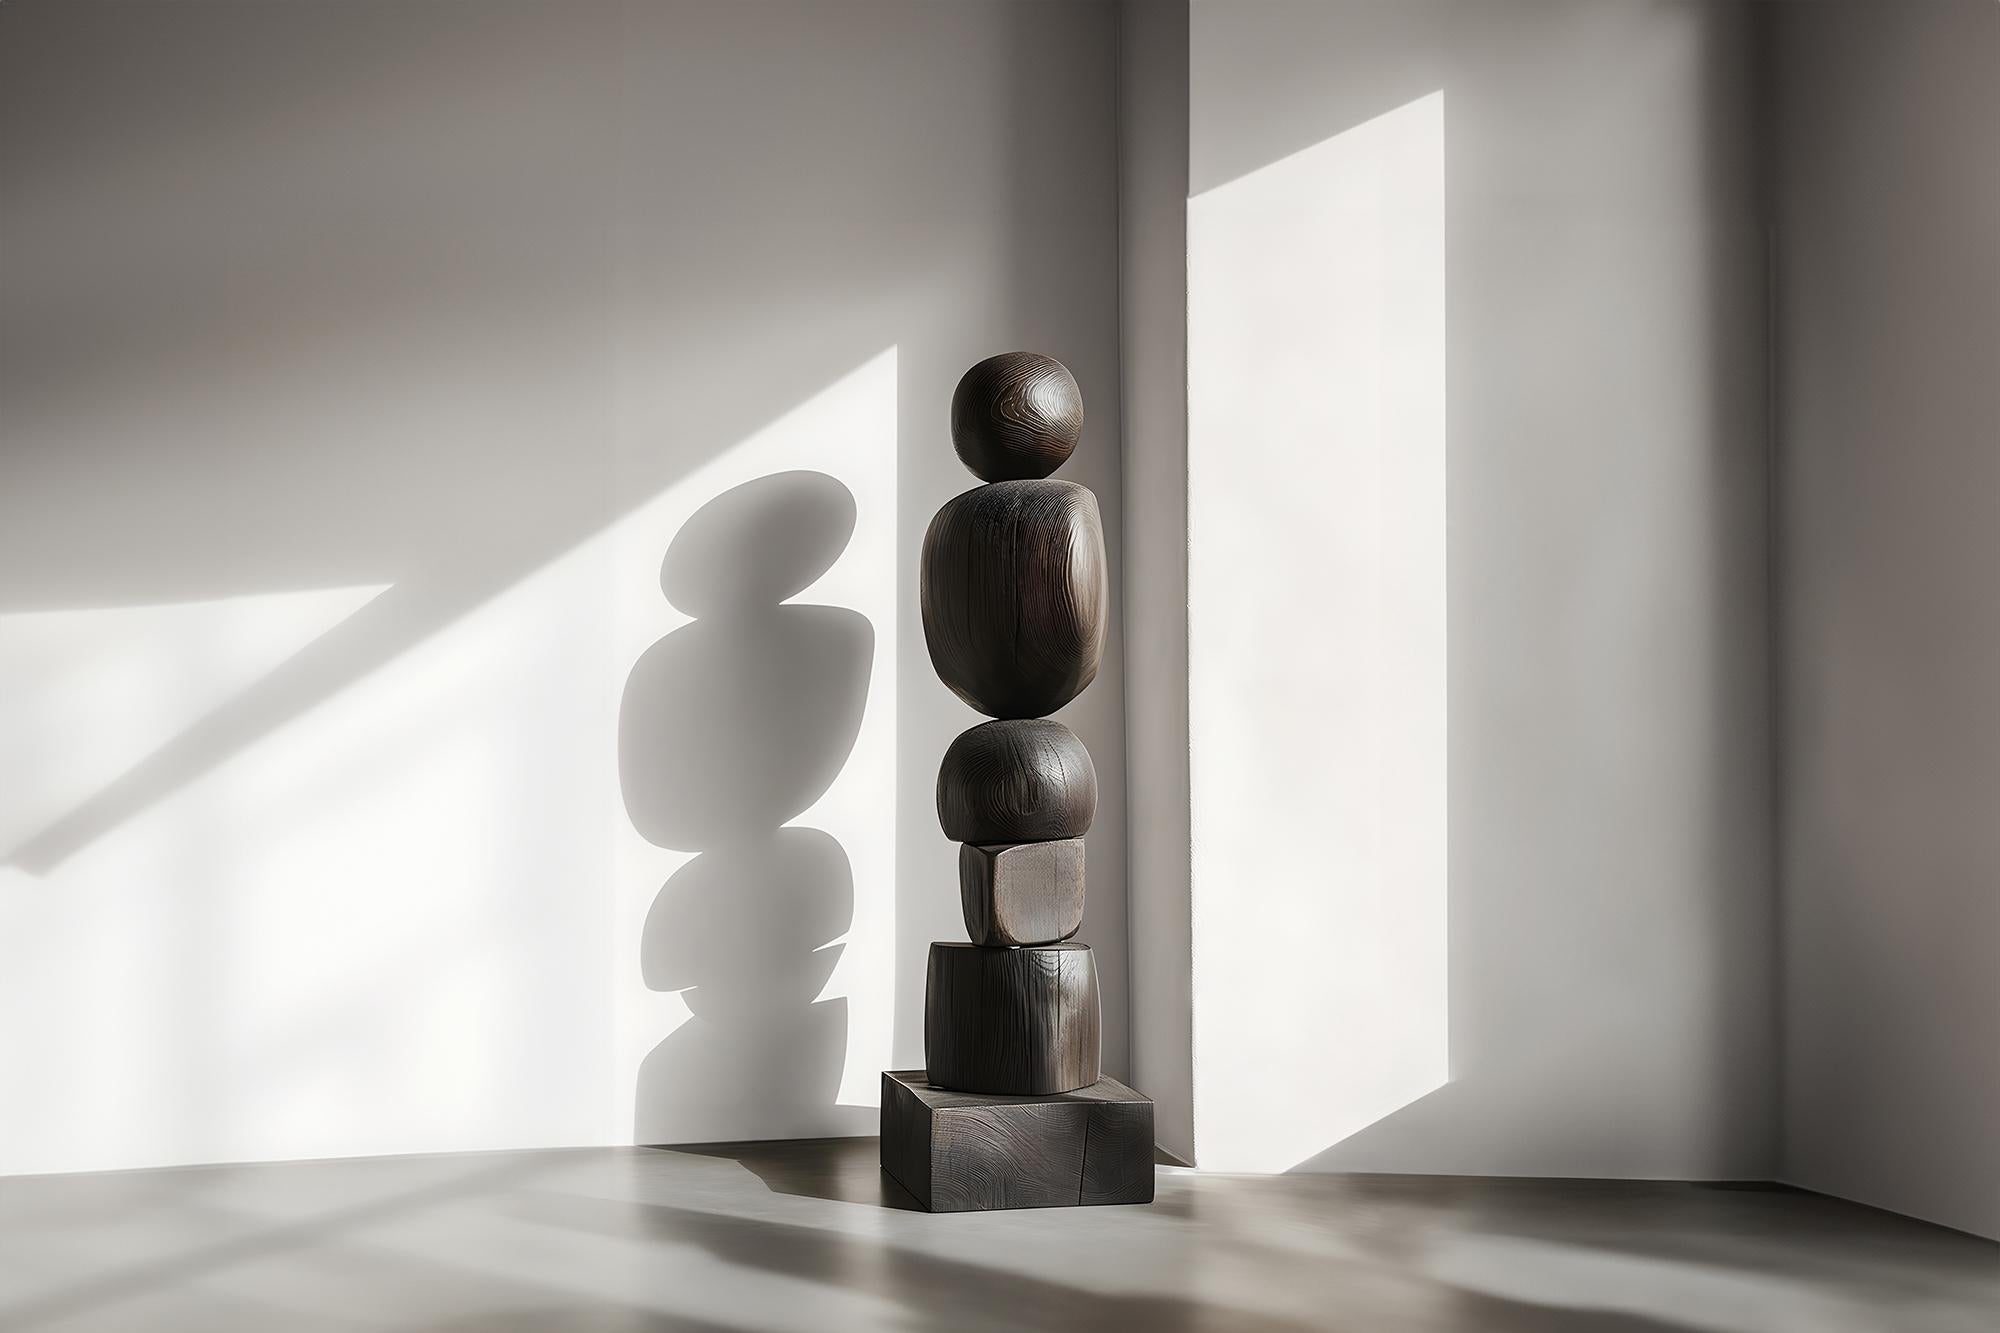 Still Stand No90, The Sleek Burned Oak Totem, a Synthesis of Dark Elegance
——


Joel Escalona's wooden standing sculptures are objects of raw beauty and serene grace. Each one is a testament to the power of the material, with smooth curves that flow